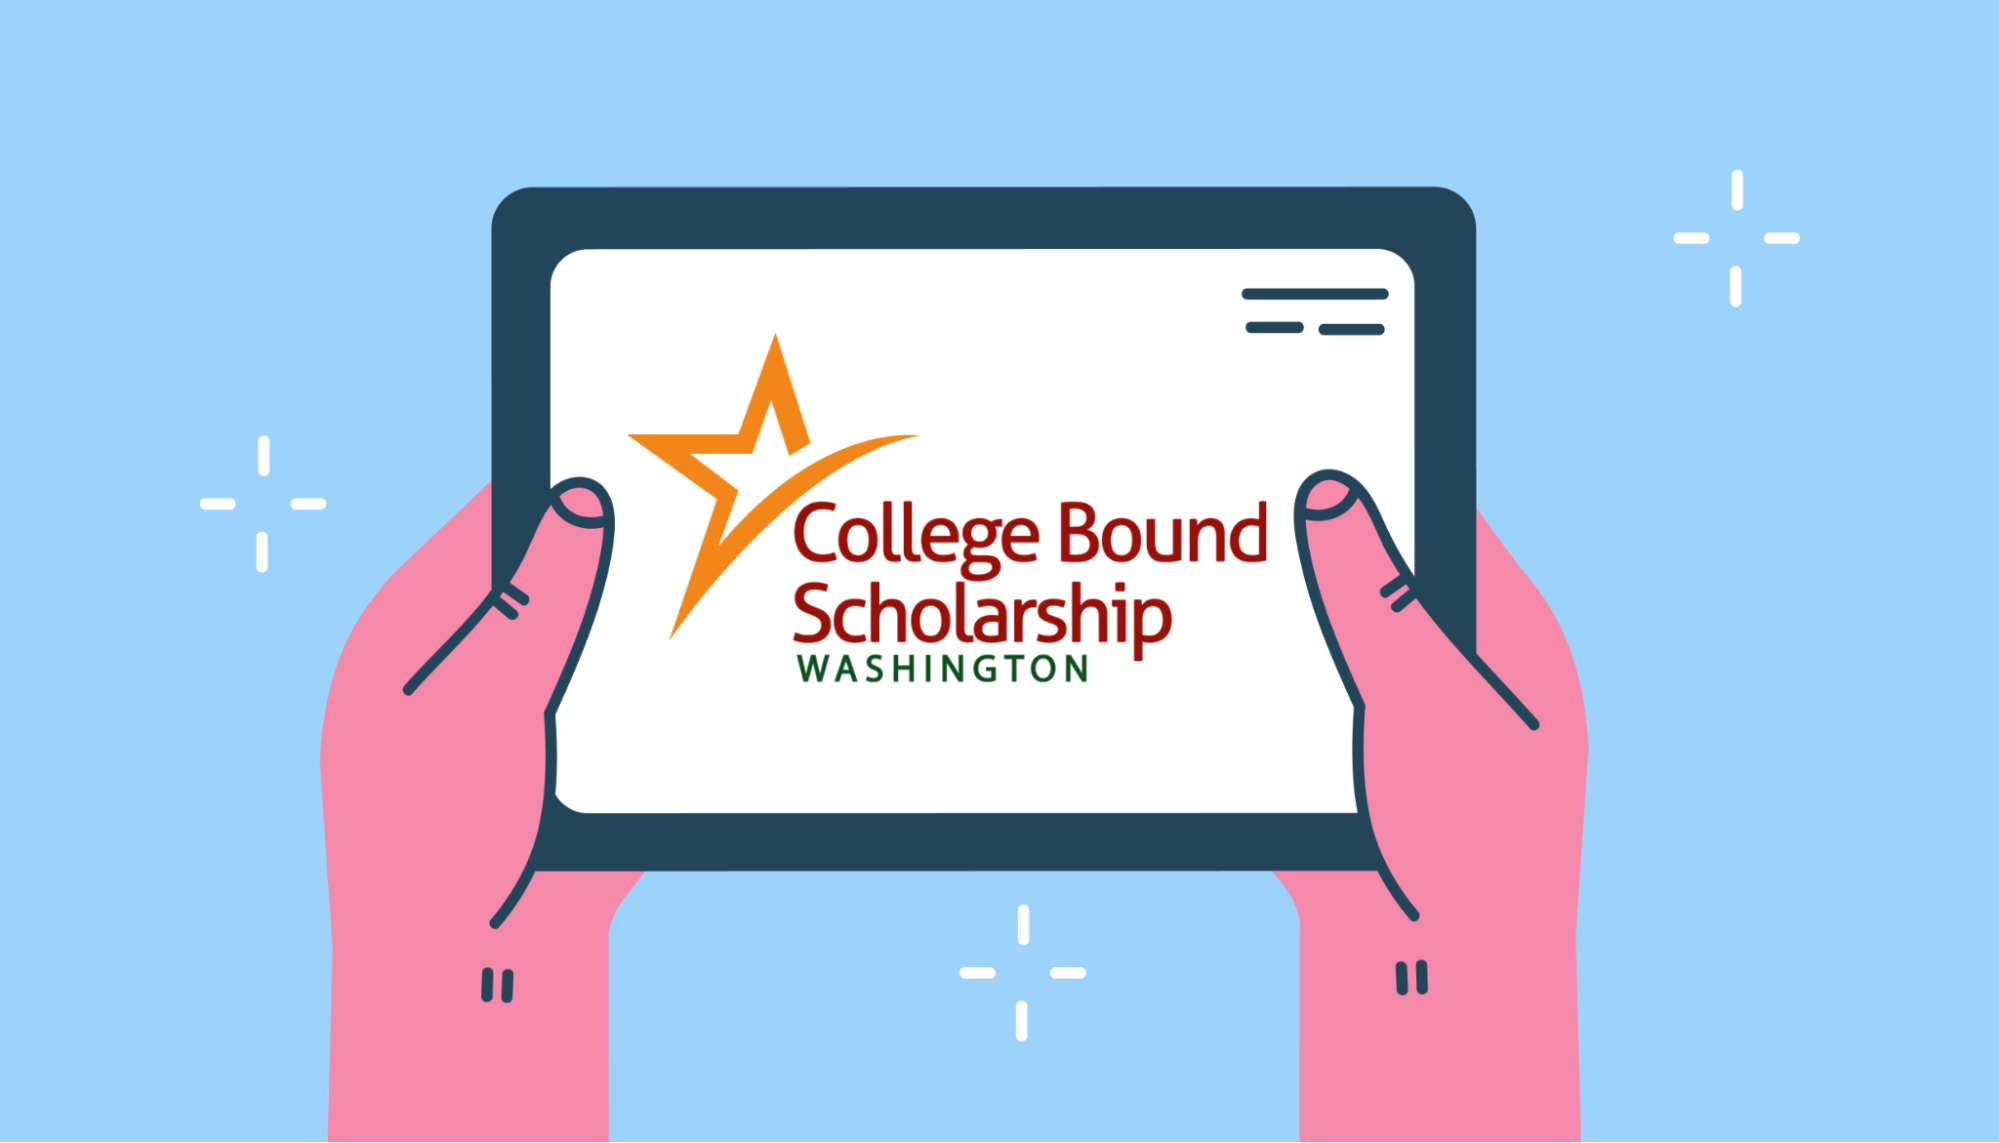 Illustration of student using laptop with College Bound Scholarship logo on screen.